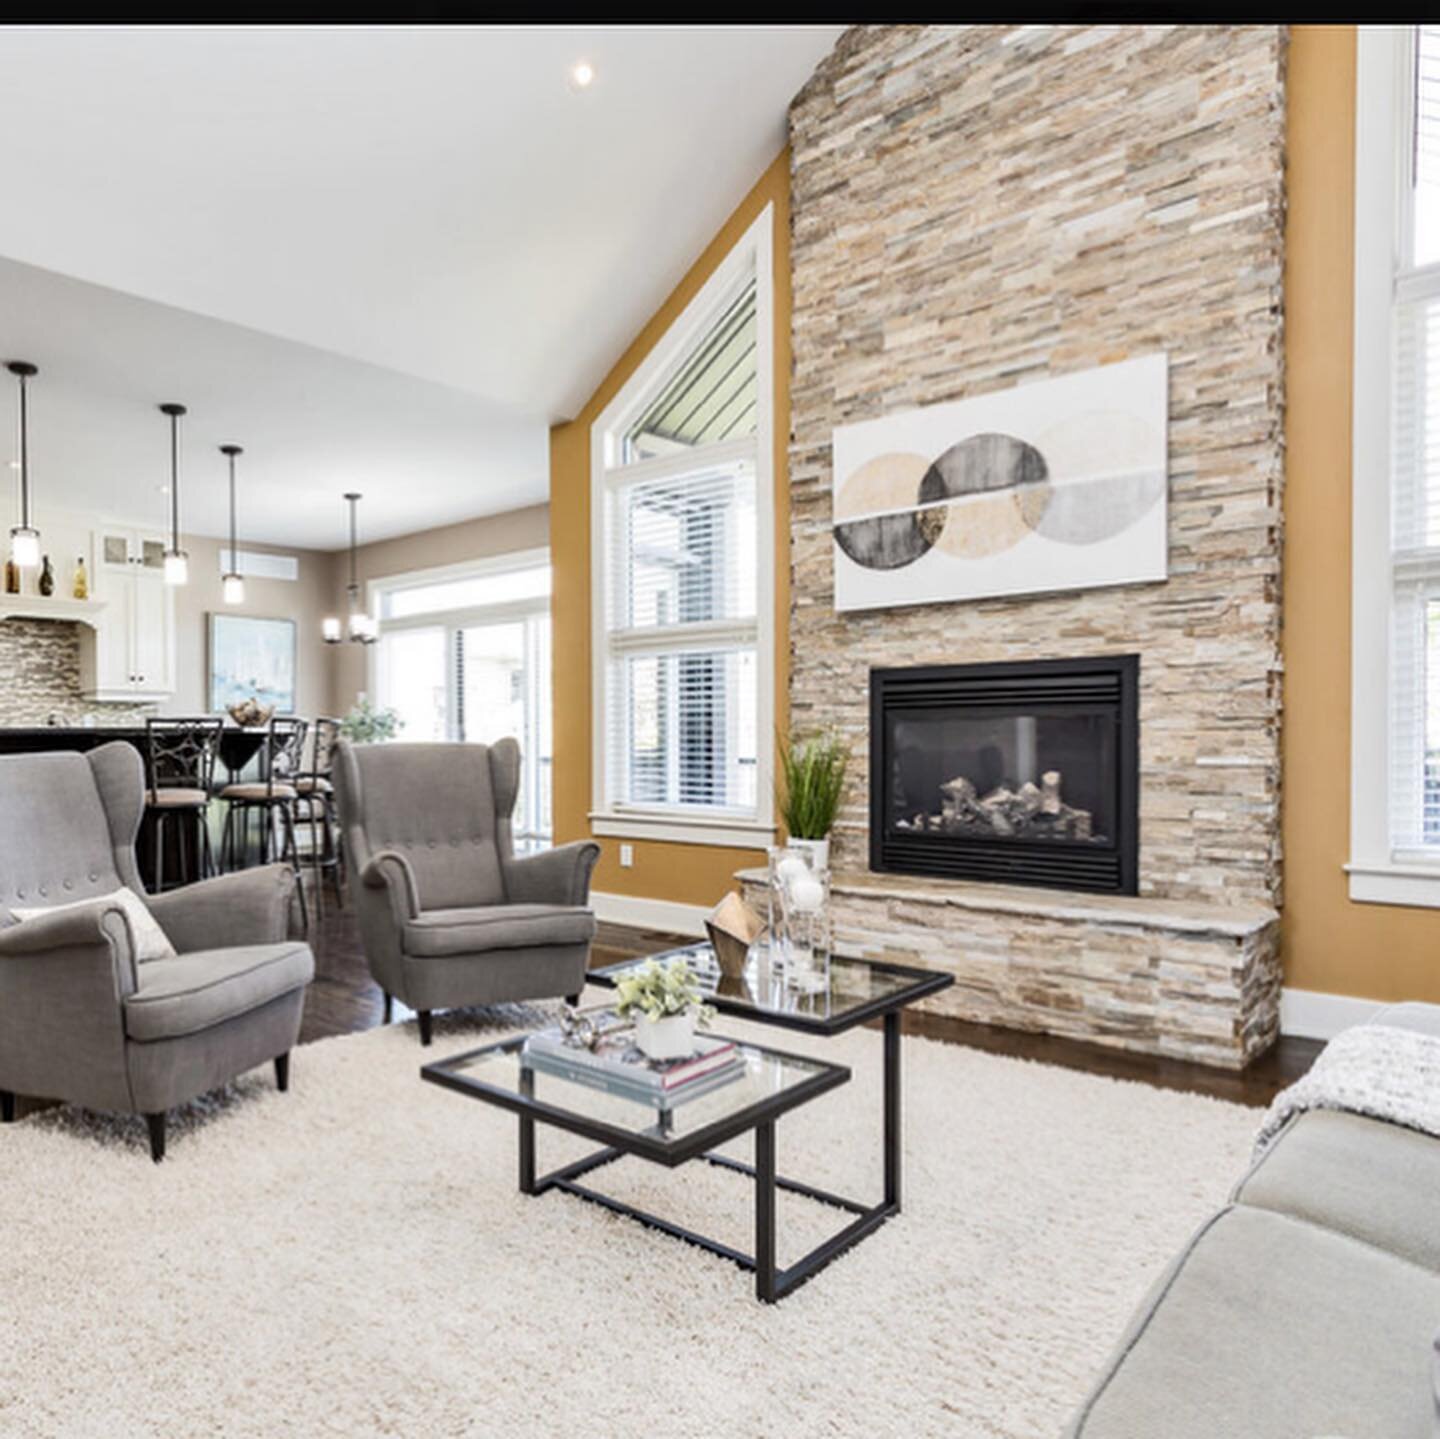 🥂Cheers to the freakin&rsquo; weekend!! 

Oh, and this stunning bungalow located in Carp, west of Ottawa. You guessed it... currently for sale through @ottawasold 

😍My favourite features:

&bull; Open concept living room/kitchen definitely takes t